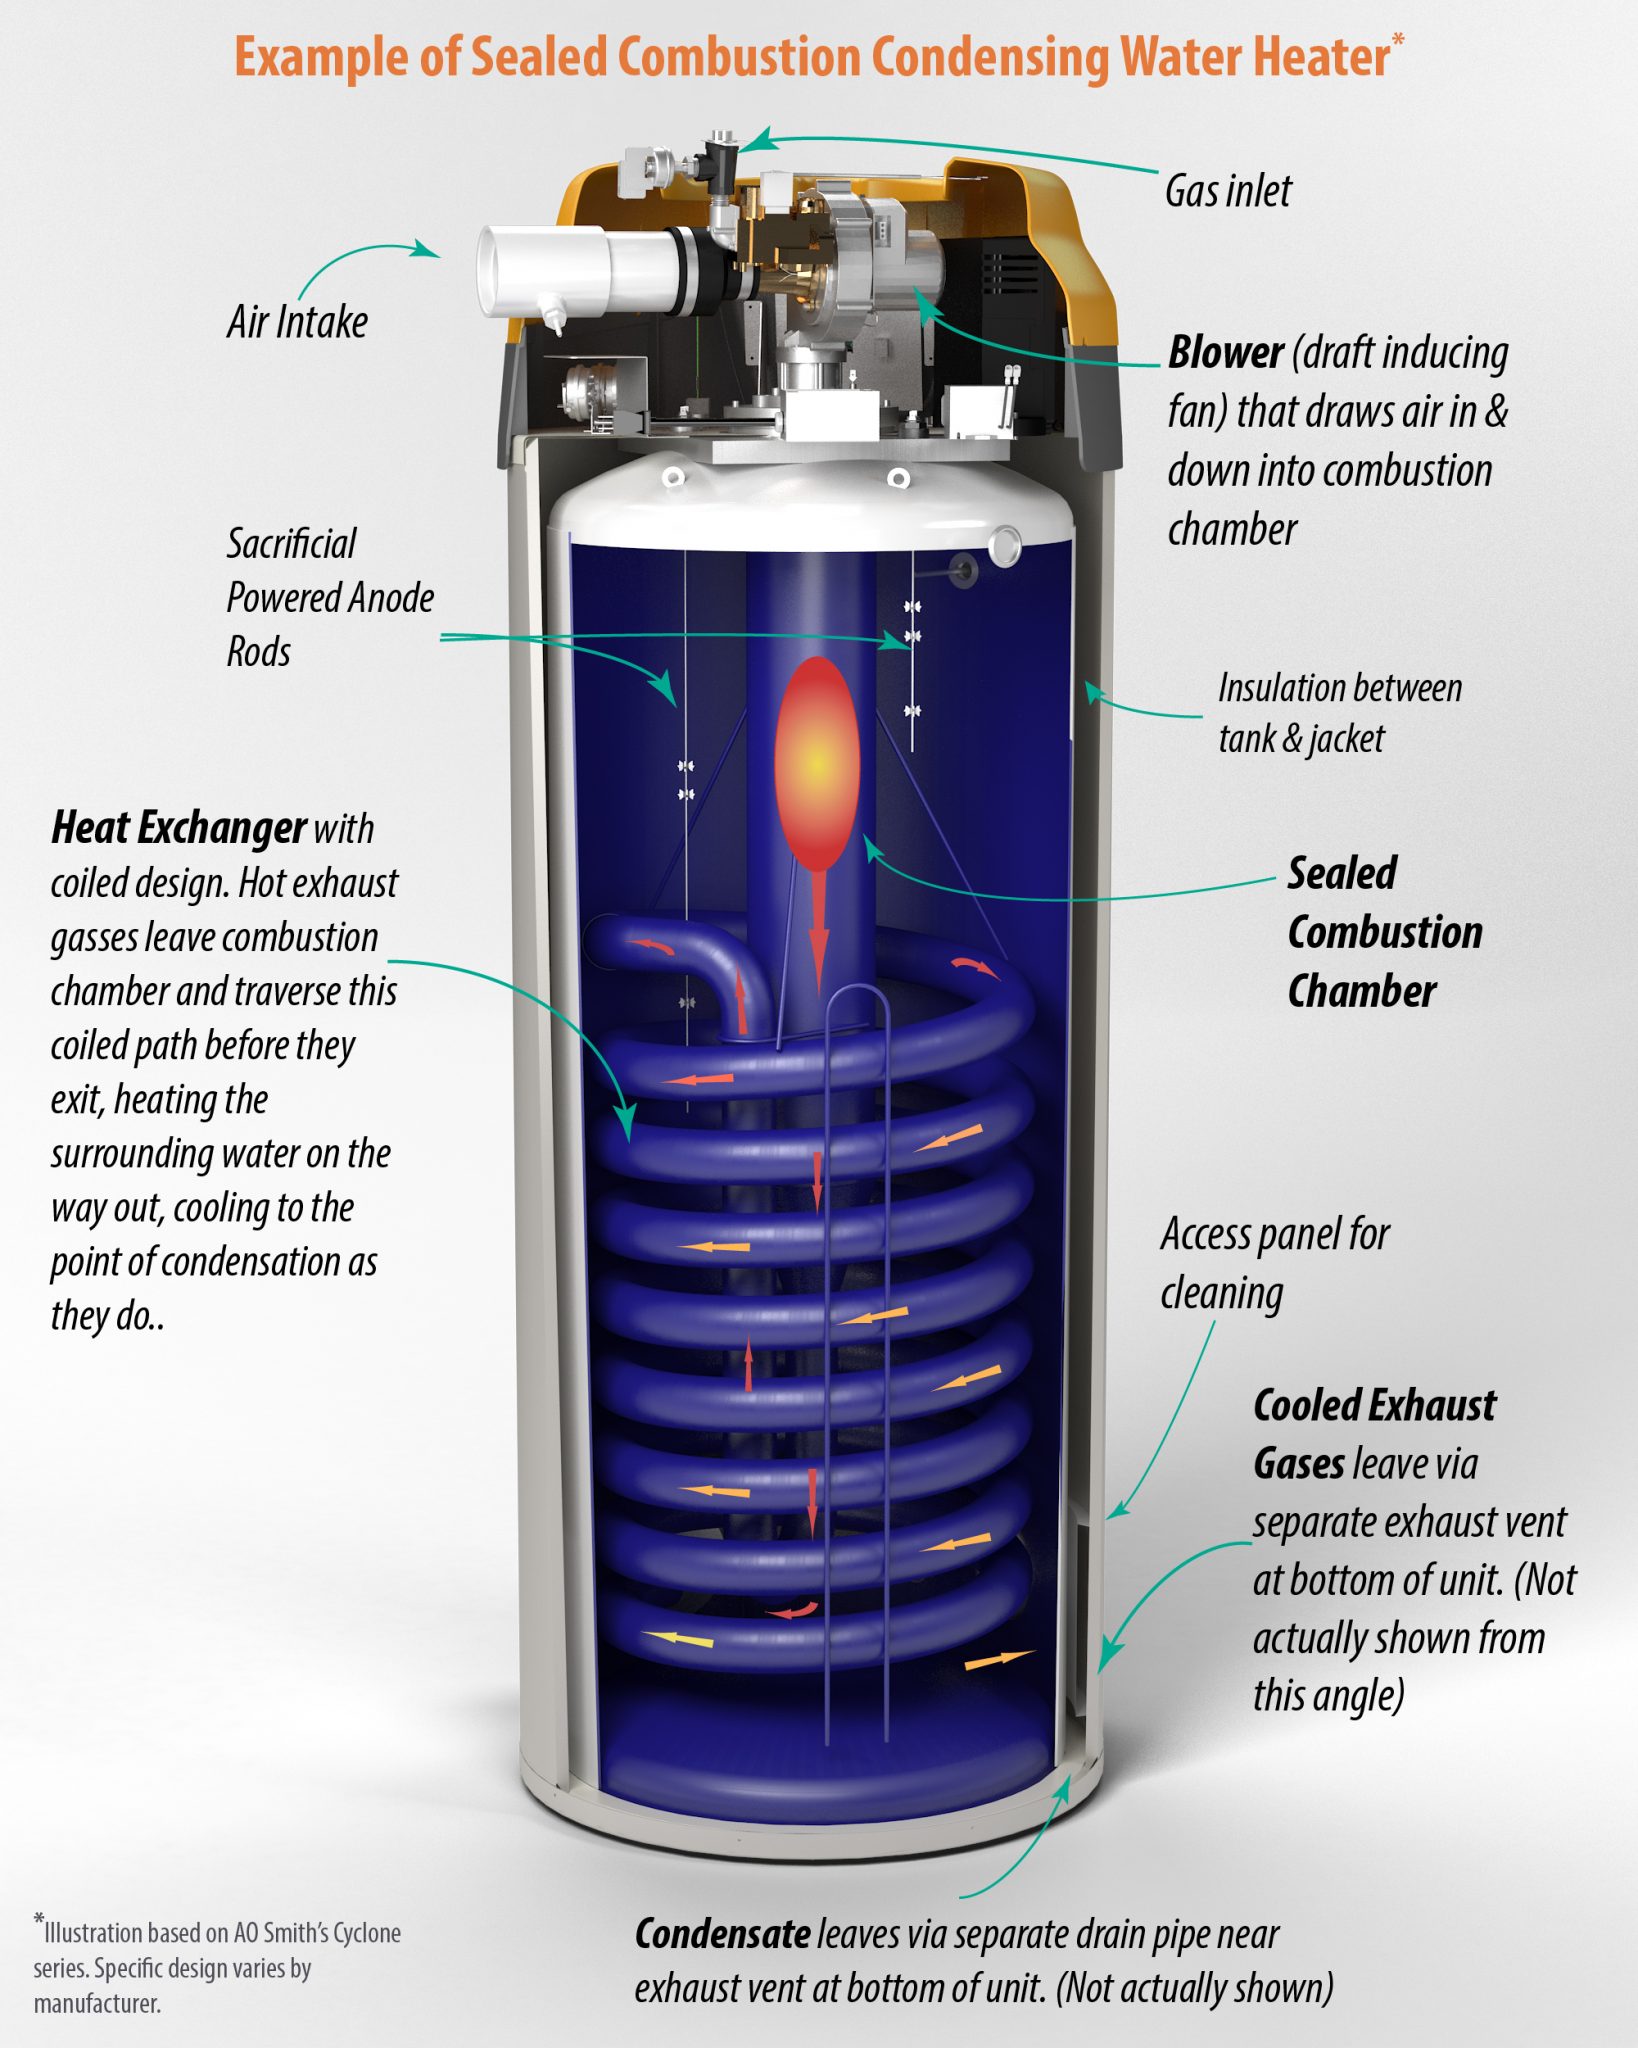 What is the difference between a hot water boiler and a water heater?